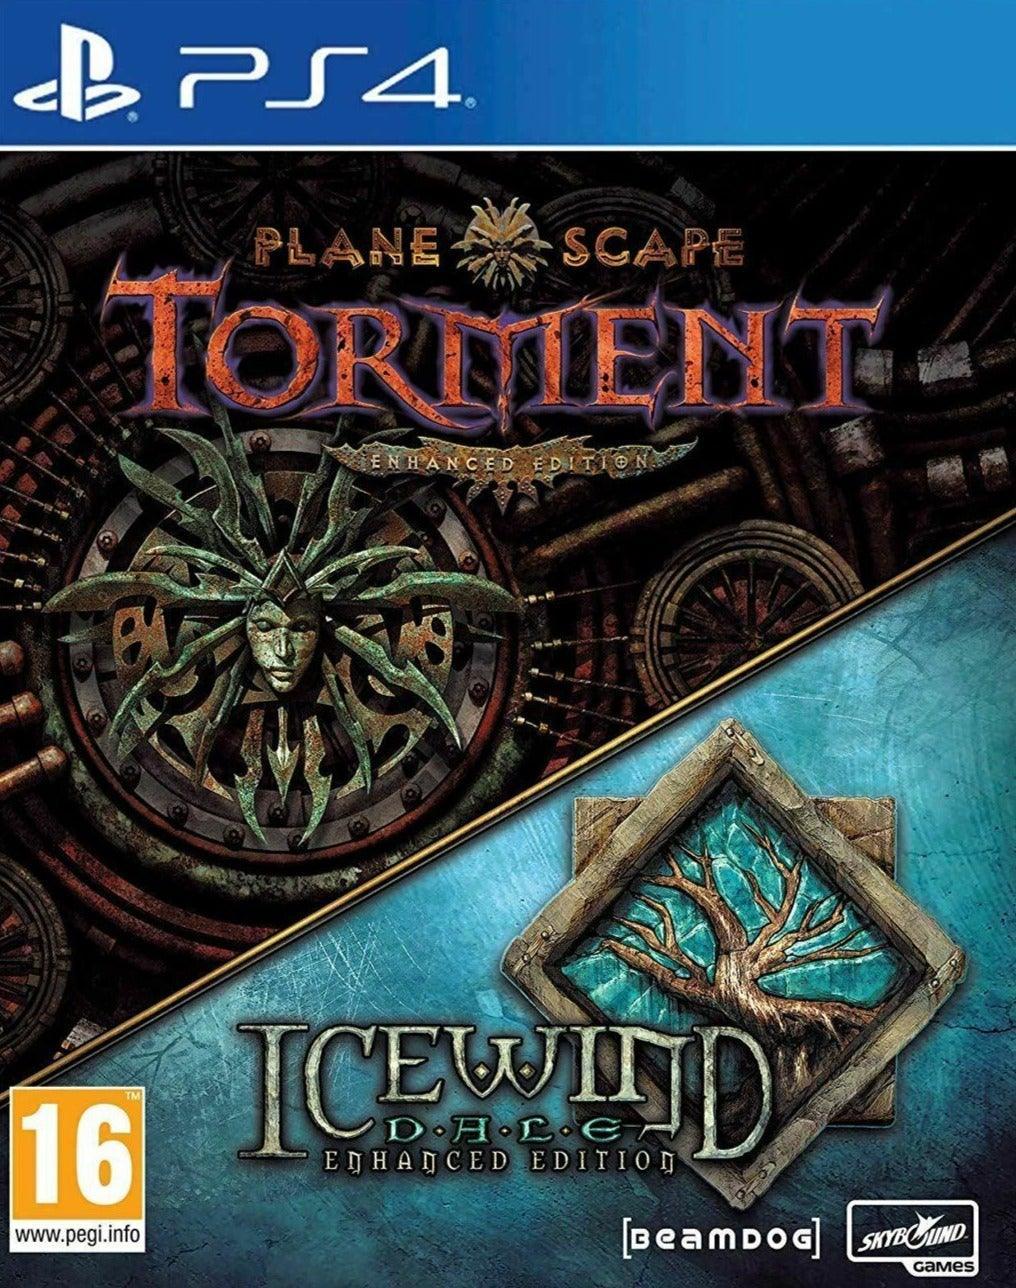 Planescape: Torment & Icewind Dale Enhanced Edition / PS4 / Playstation 4 - GD Games 